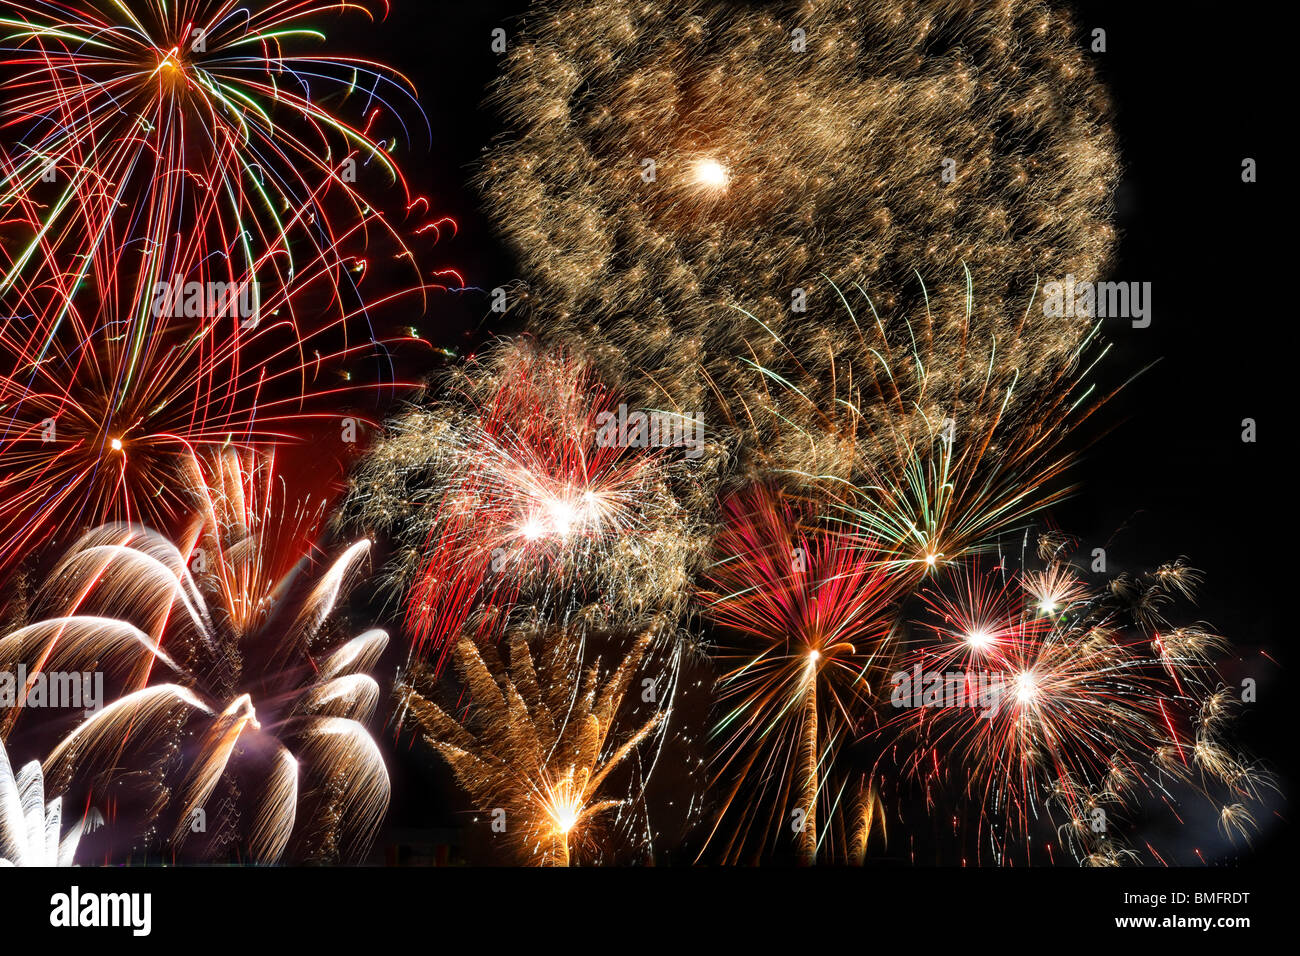 Fireworks on New Year's Eve Stock Photo